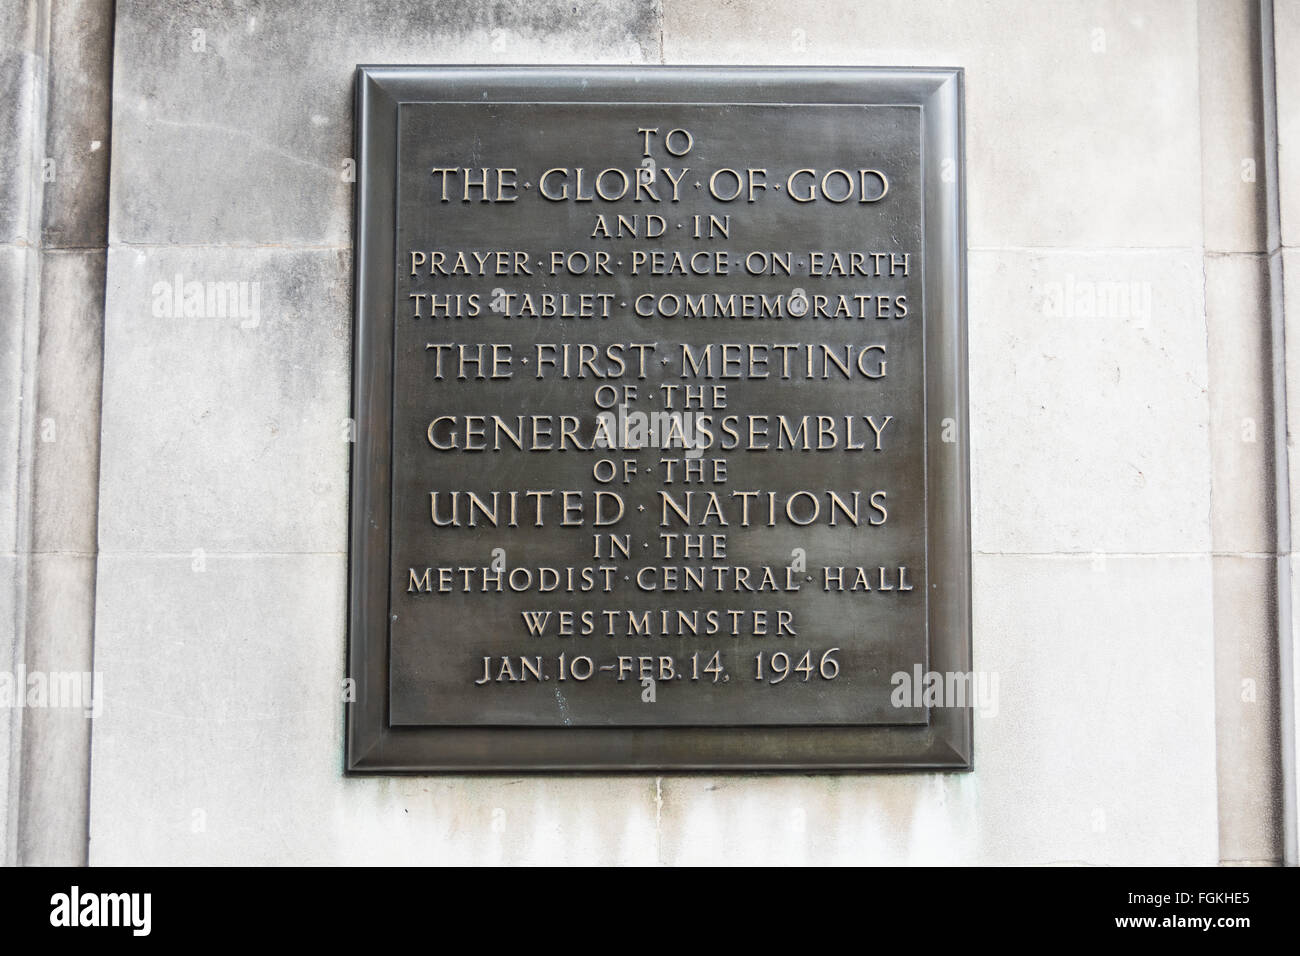 The first session of the United Nations General Assembly was convened on 10 January 1946 and met at Westminster Central Hall. Stock Photo